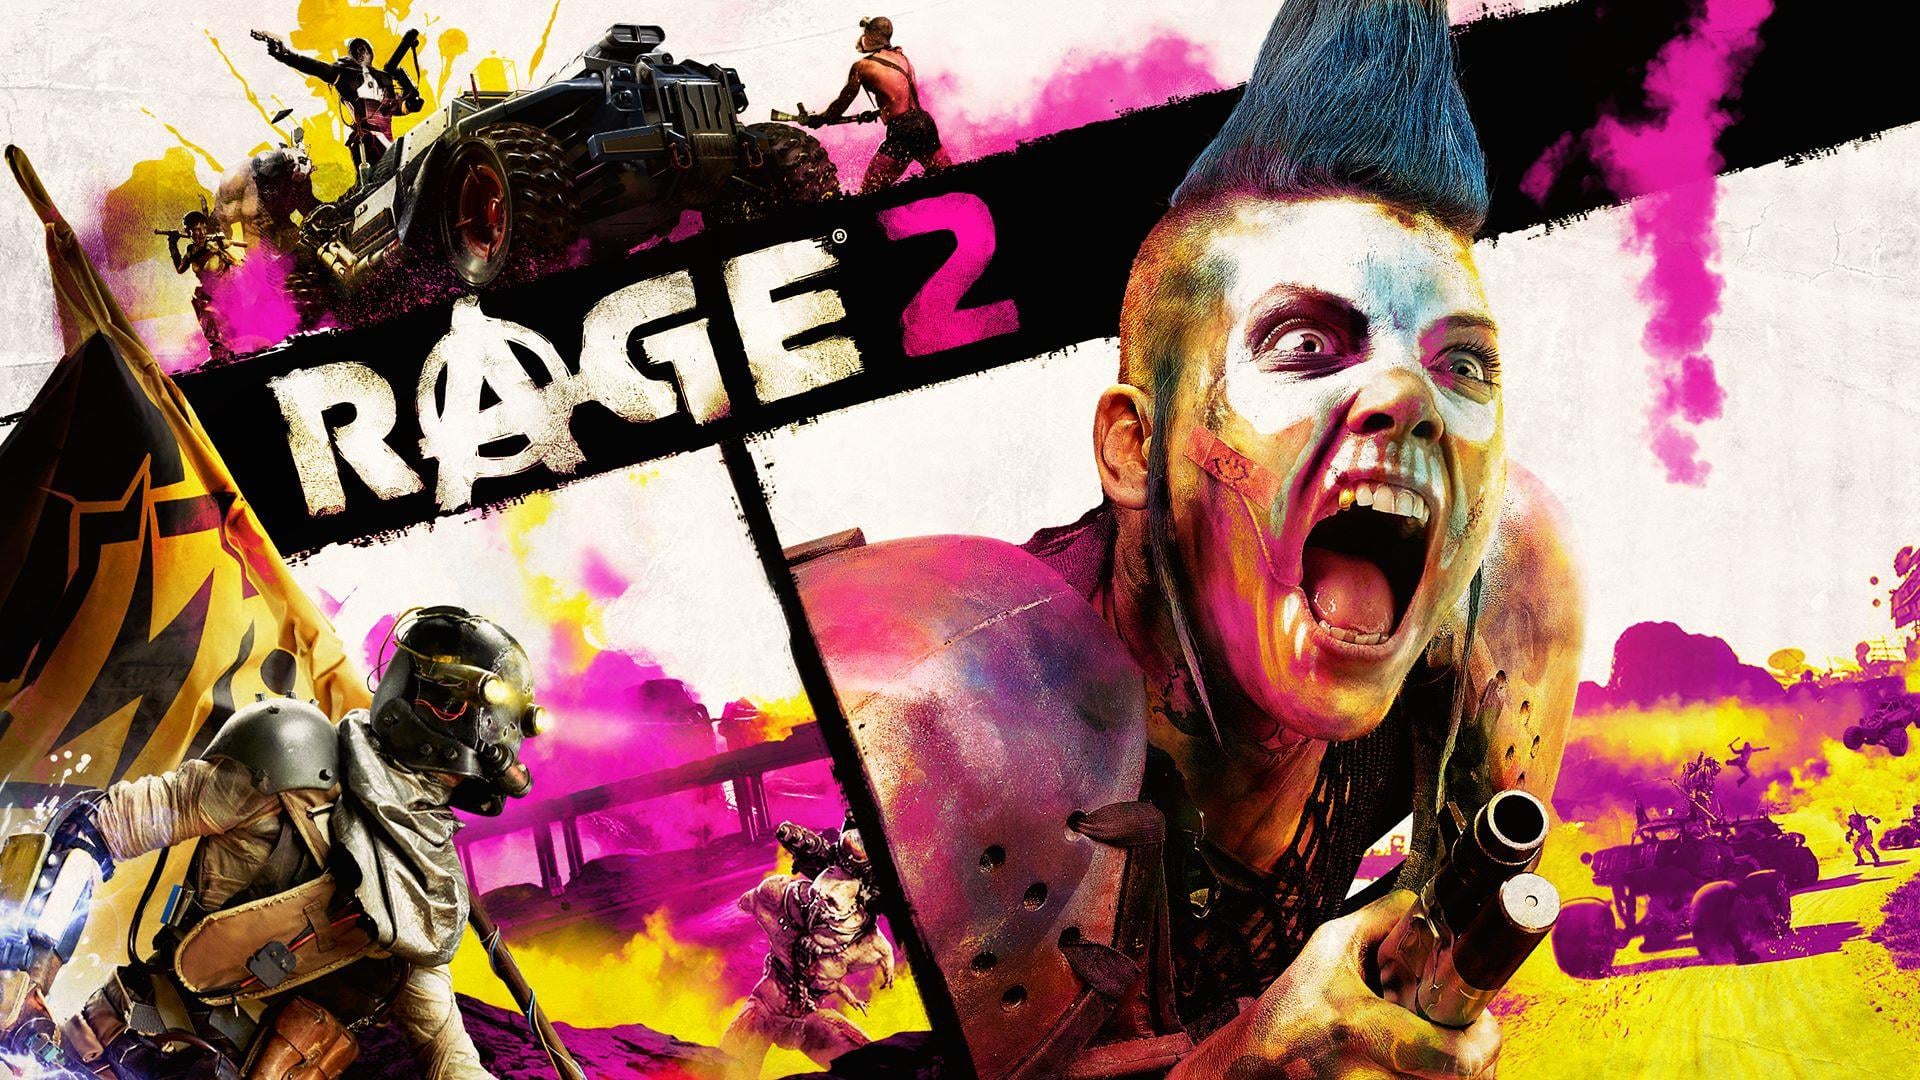 Rage 2 review roundup